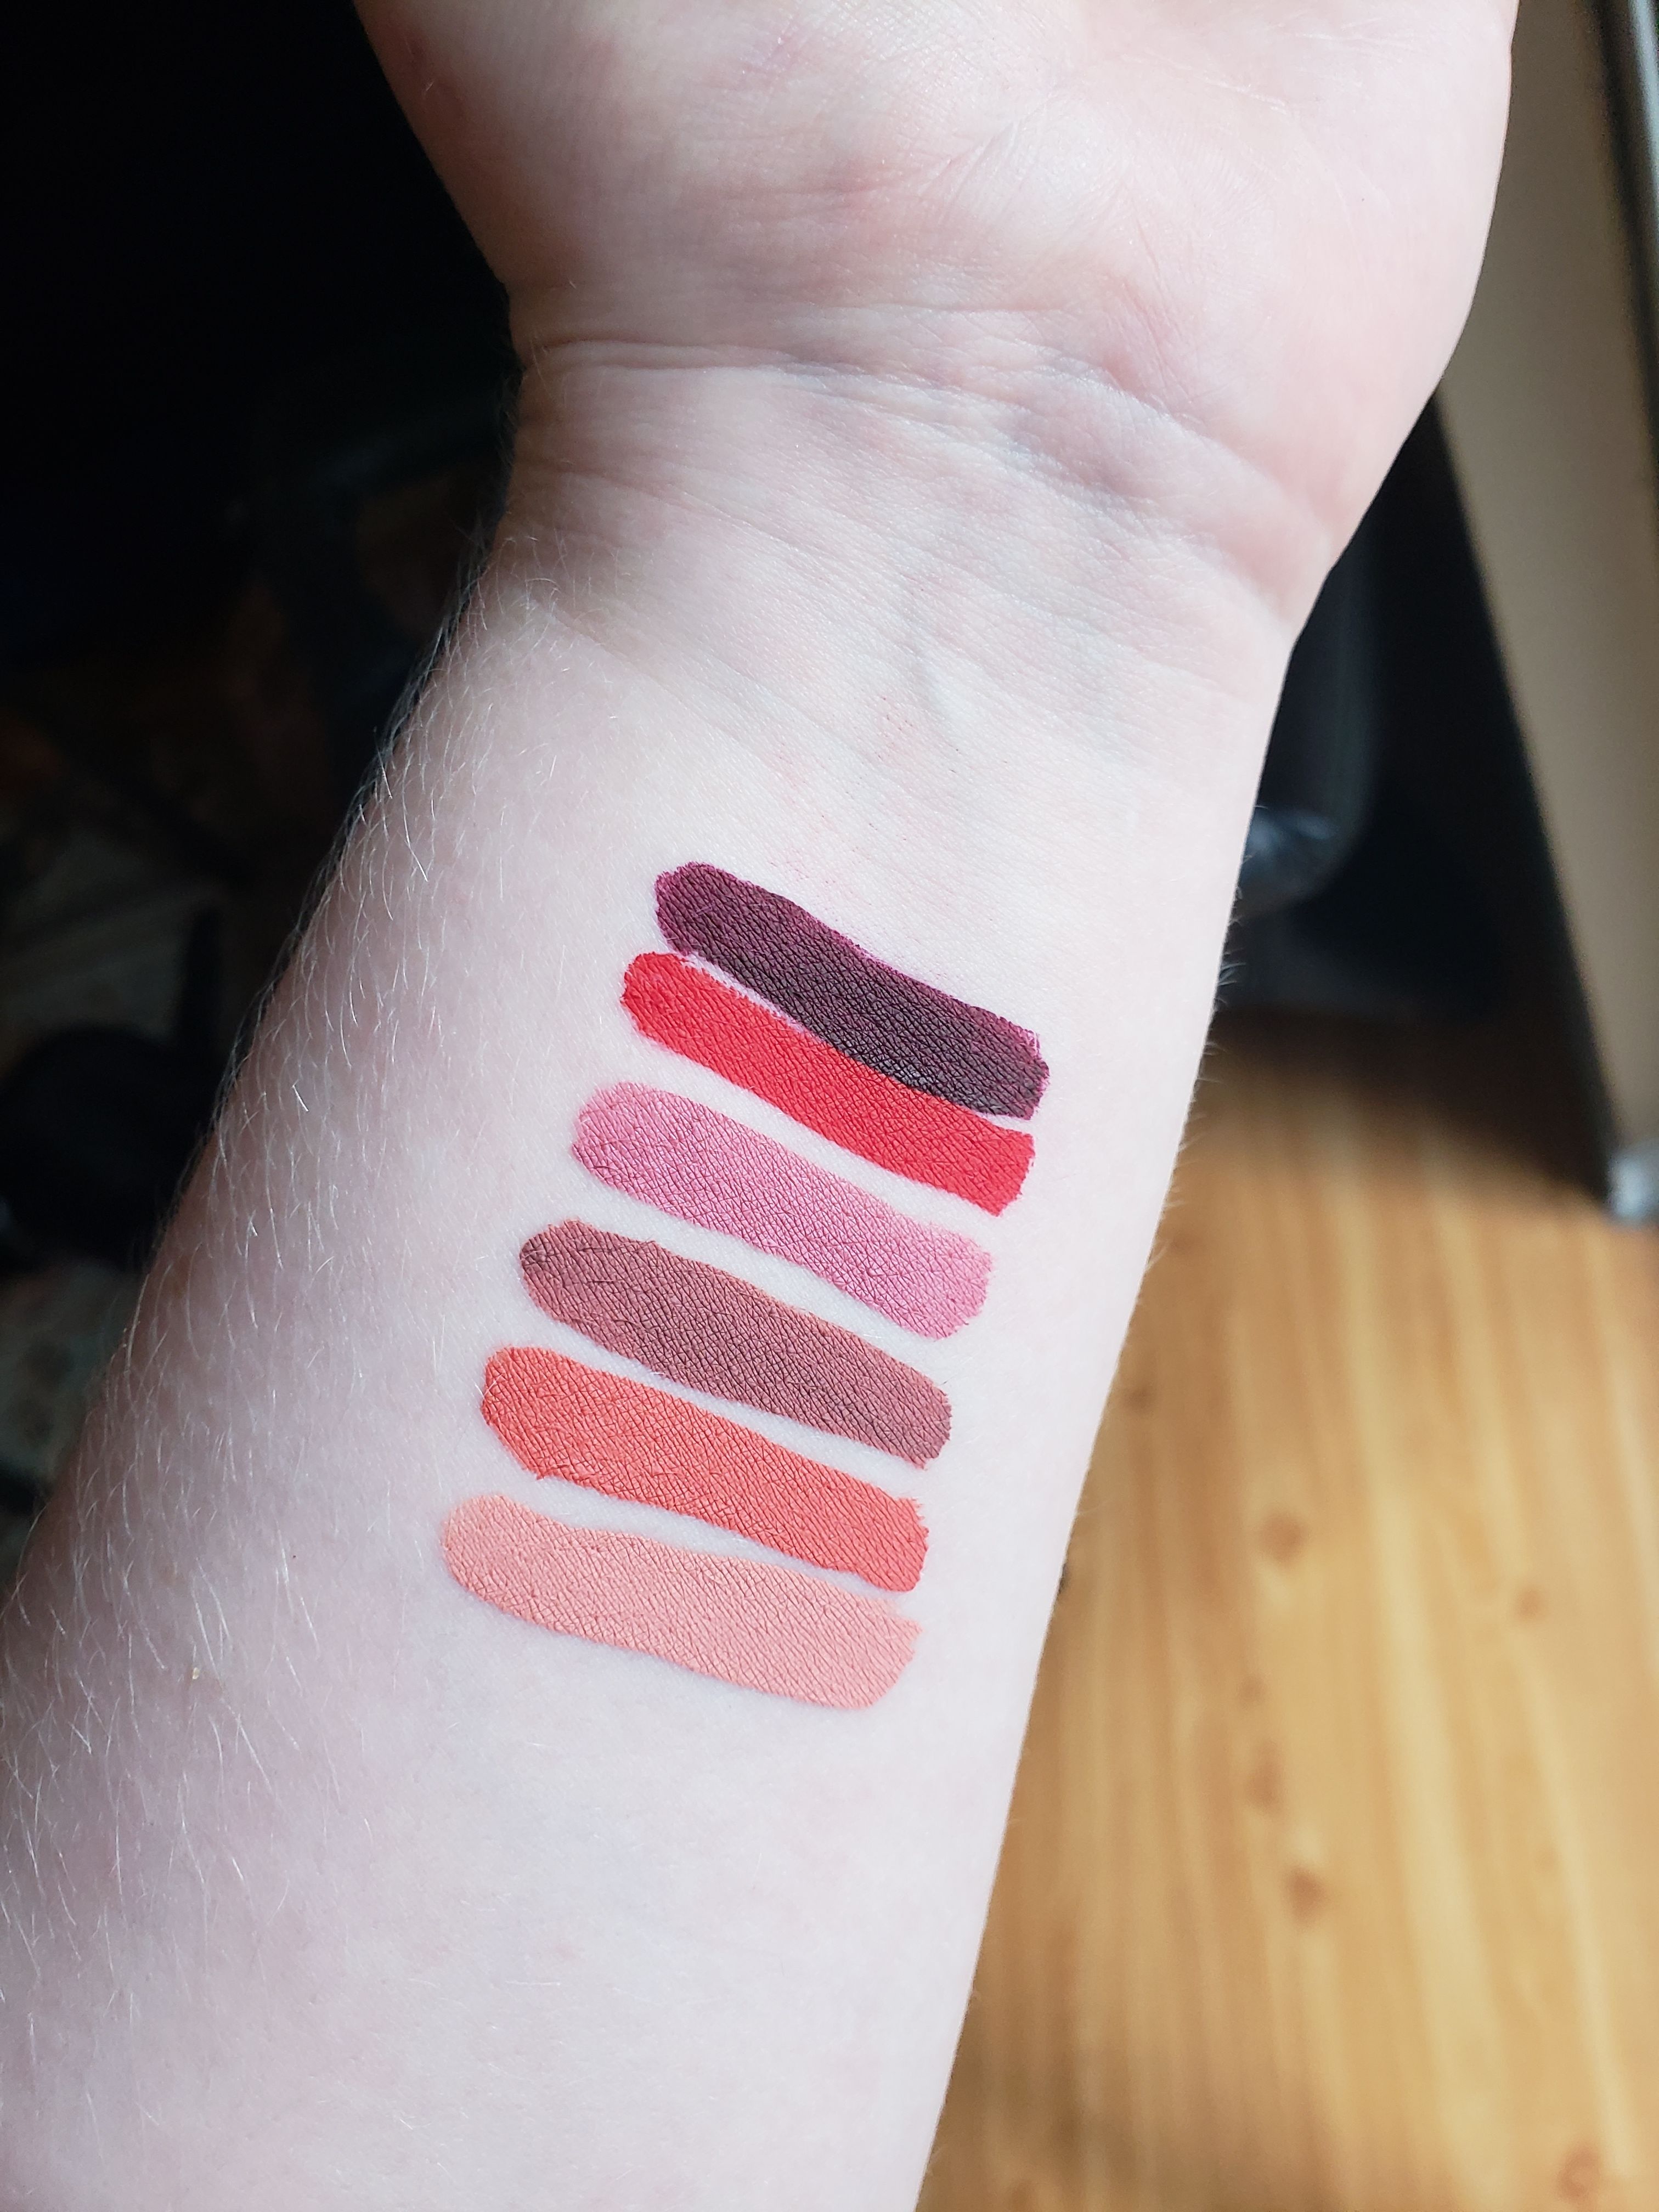 Swatches of the Sephora Cream Lip Stain ... - Beauty Insider Community